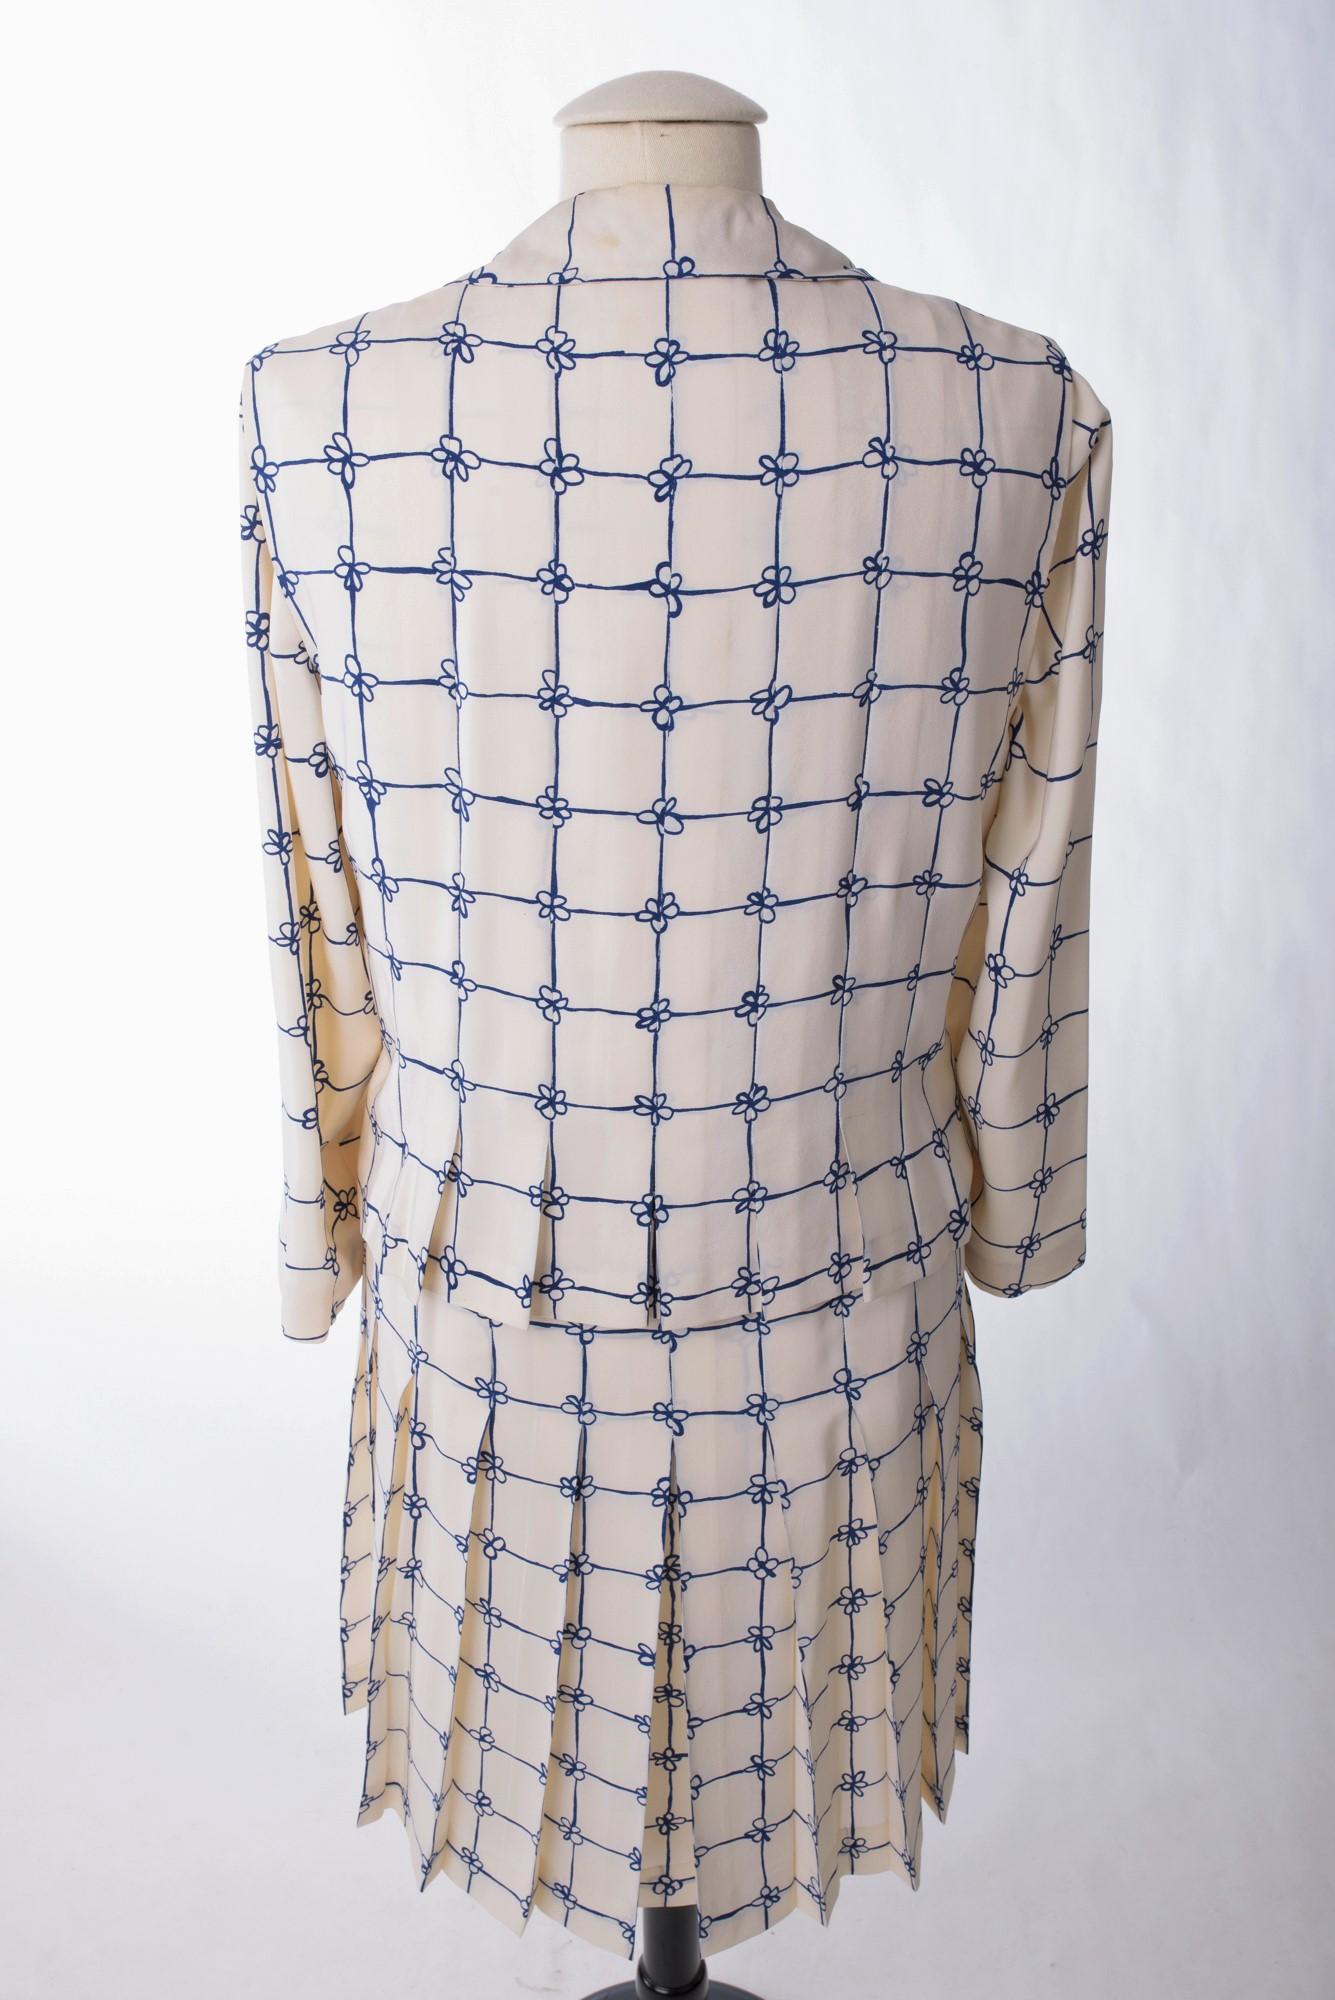 A Mademoiselle Chanel Haute Couture Printed Crepe dress Number 61476 Circa 1960 7